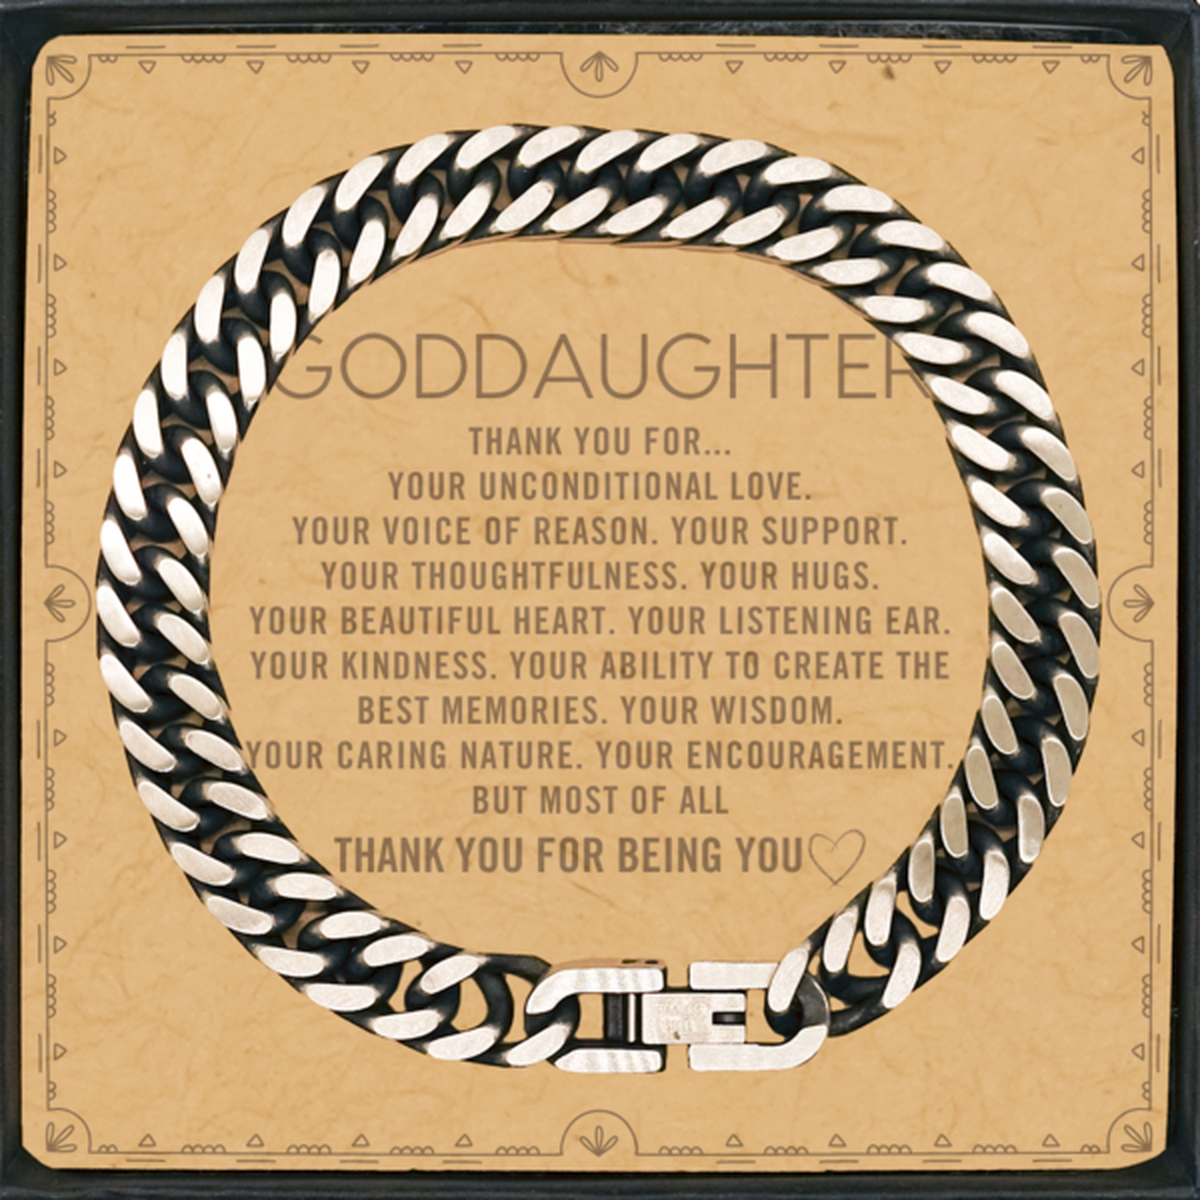 Goddaughter Cuban Link Chain Bracelet Custom, Message Card Gifts For Goddaughter Christmas Graduation Birthday Gifts for Men Women Goddaughter Thank you for Your unconditional love